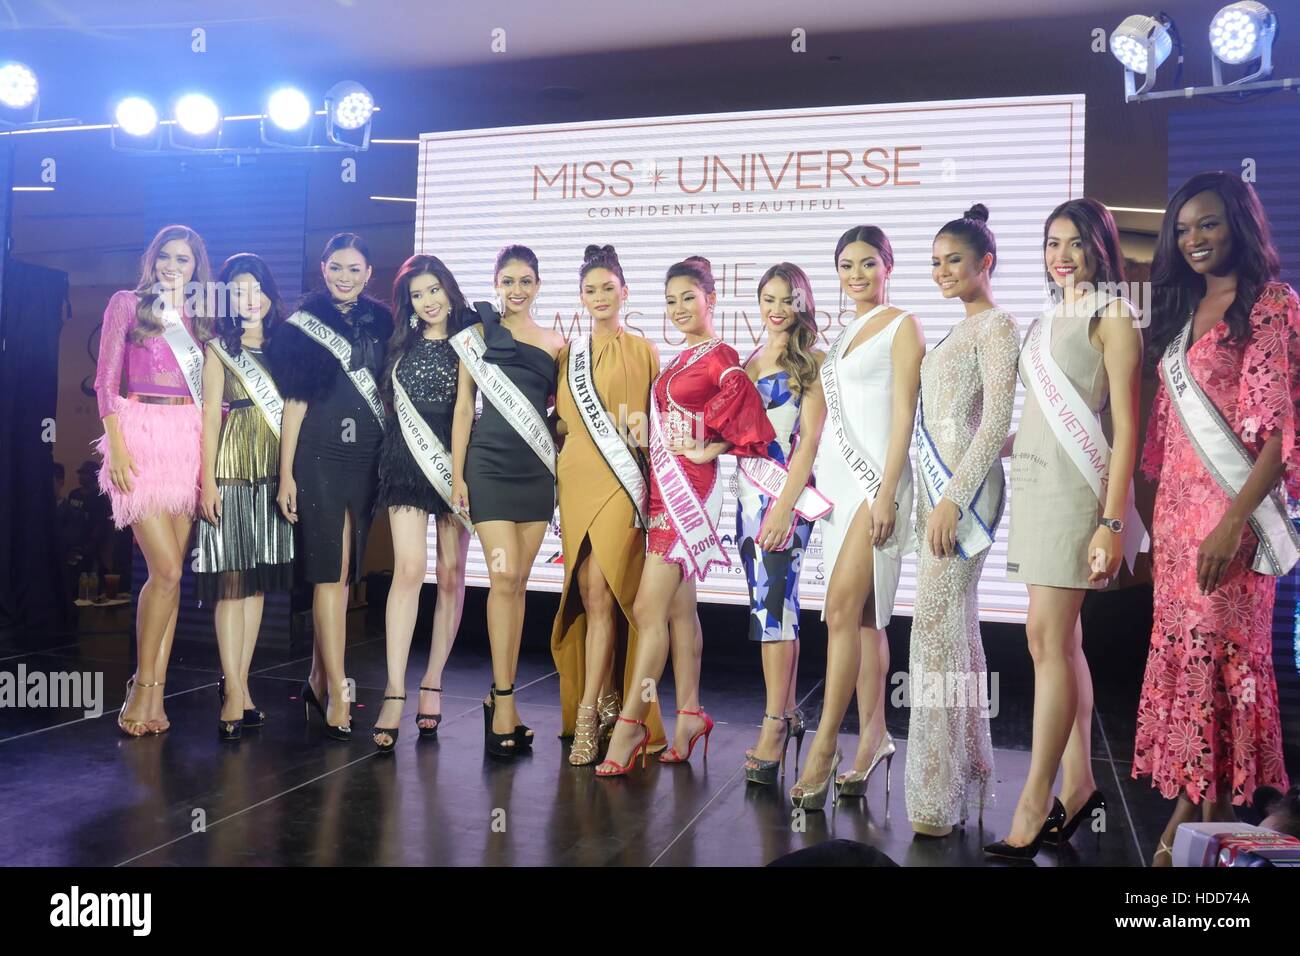 Pia Wurtzbach, in the center, takes a photo op with the 10 Miss Universe Candidates that came from (L - R) Australia, Japan, Indonesia, Korea, Malaysia, Myanmar, New Zealand, Philippines, Thailand, Vietnam and USA. Miss Universe officially started in the Philippines with its Kick-off Party at S Maison Mall, Conrad Hotel, SM Mall of Asia, Pasay City at 7:00pm. Presented with Pia Wurtzbach, reigning Miss Universe, candidates from Australia, Japan, Indonesia, Korea, Malaysia, Myanmar, New Zealand, Philippines, Thailand, Vietnam and USA. (Photo by George Buid/Pacific Press) Stock Photo